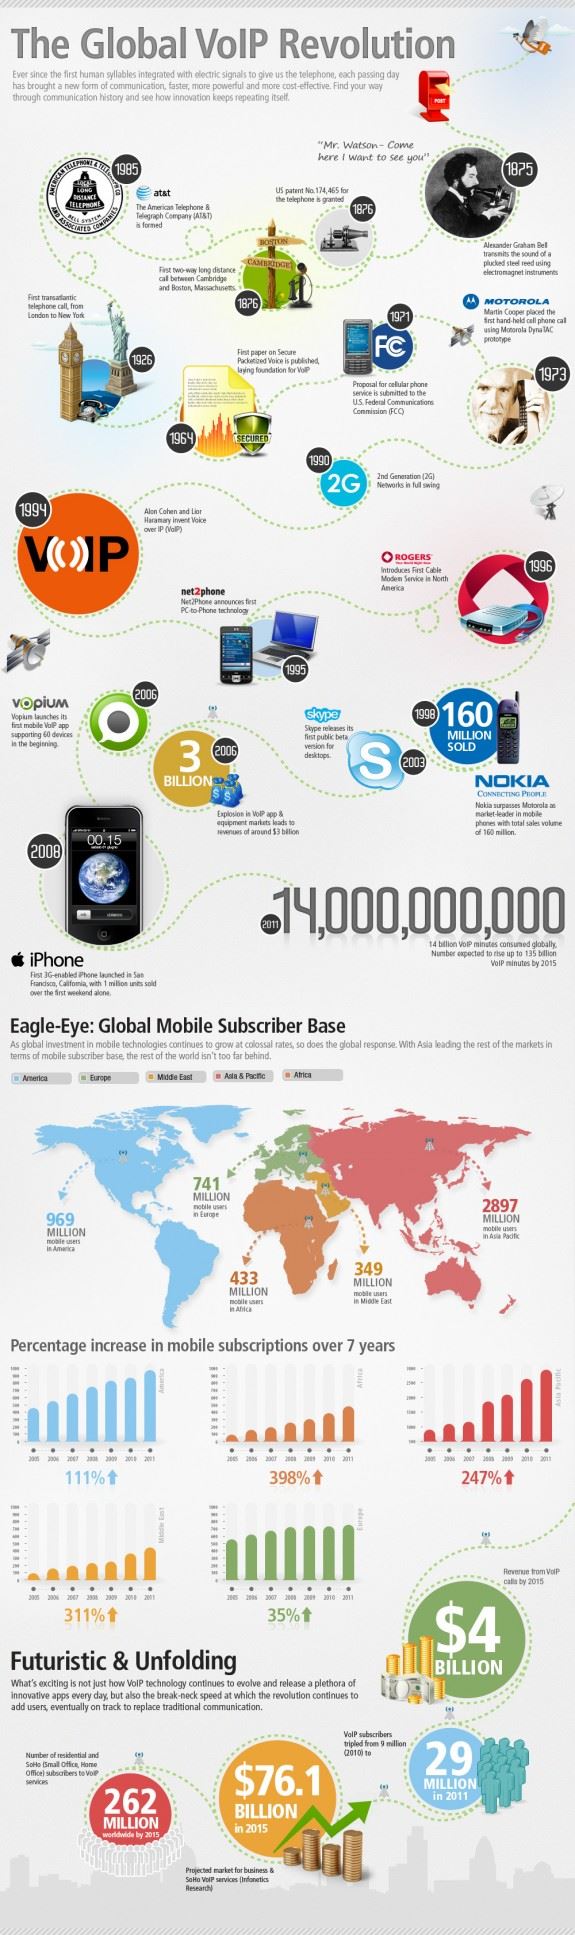 INFOGRAPHIC: The Global VoIP Revolution